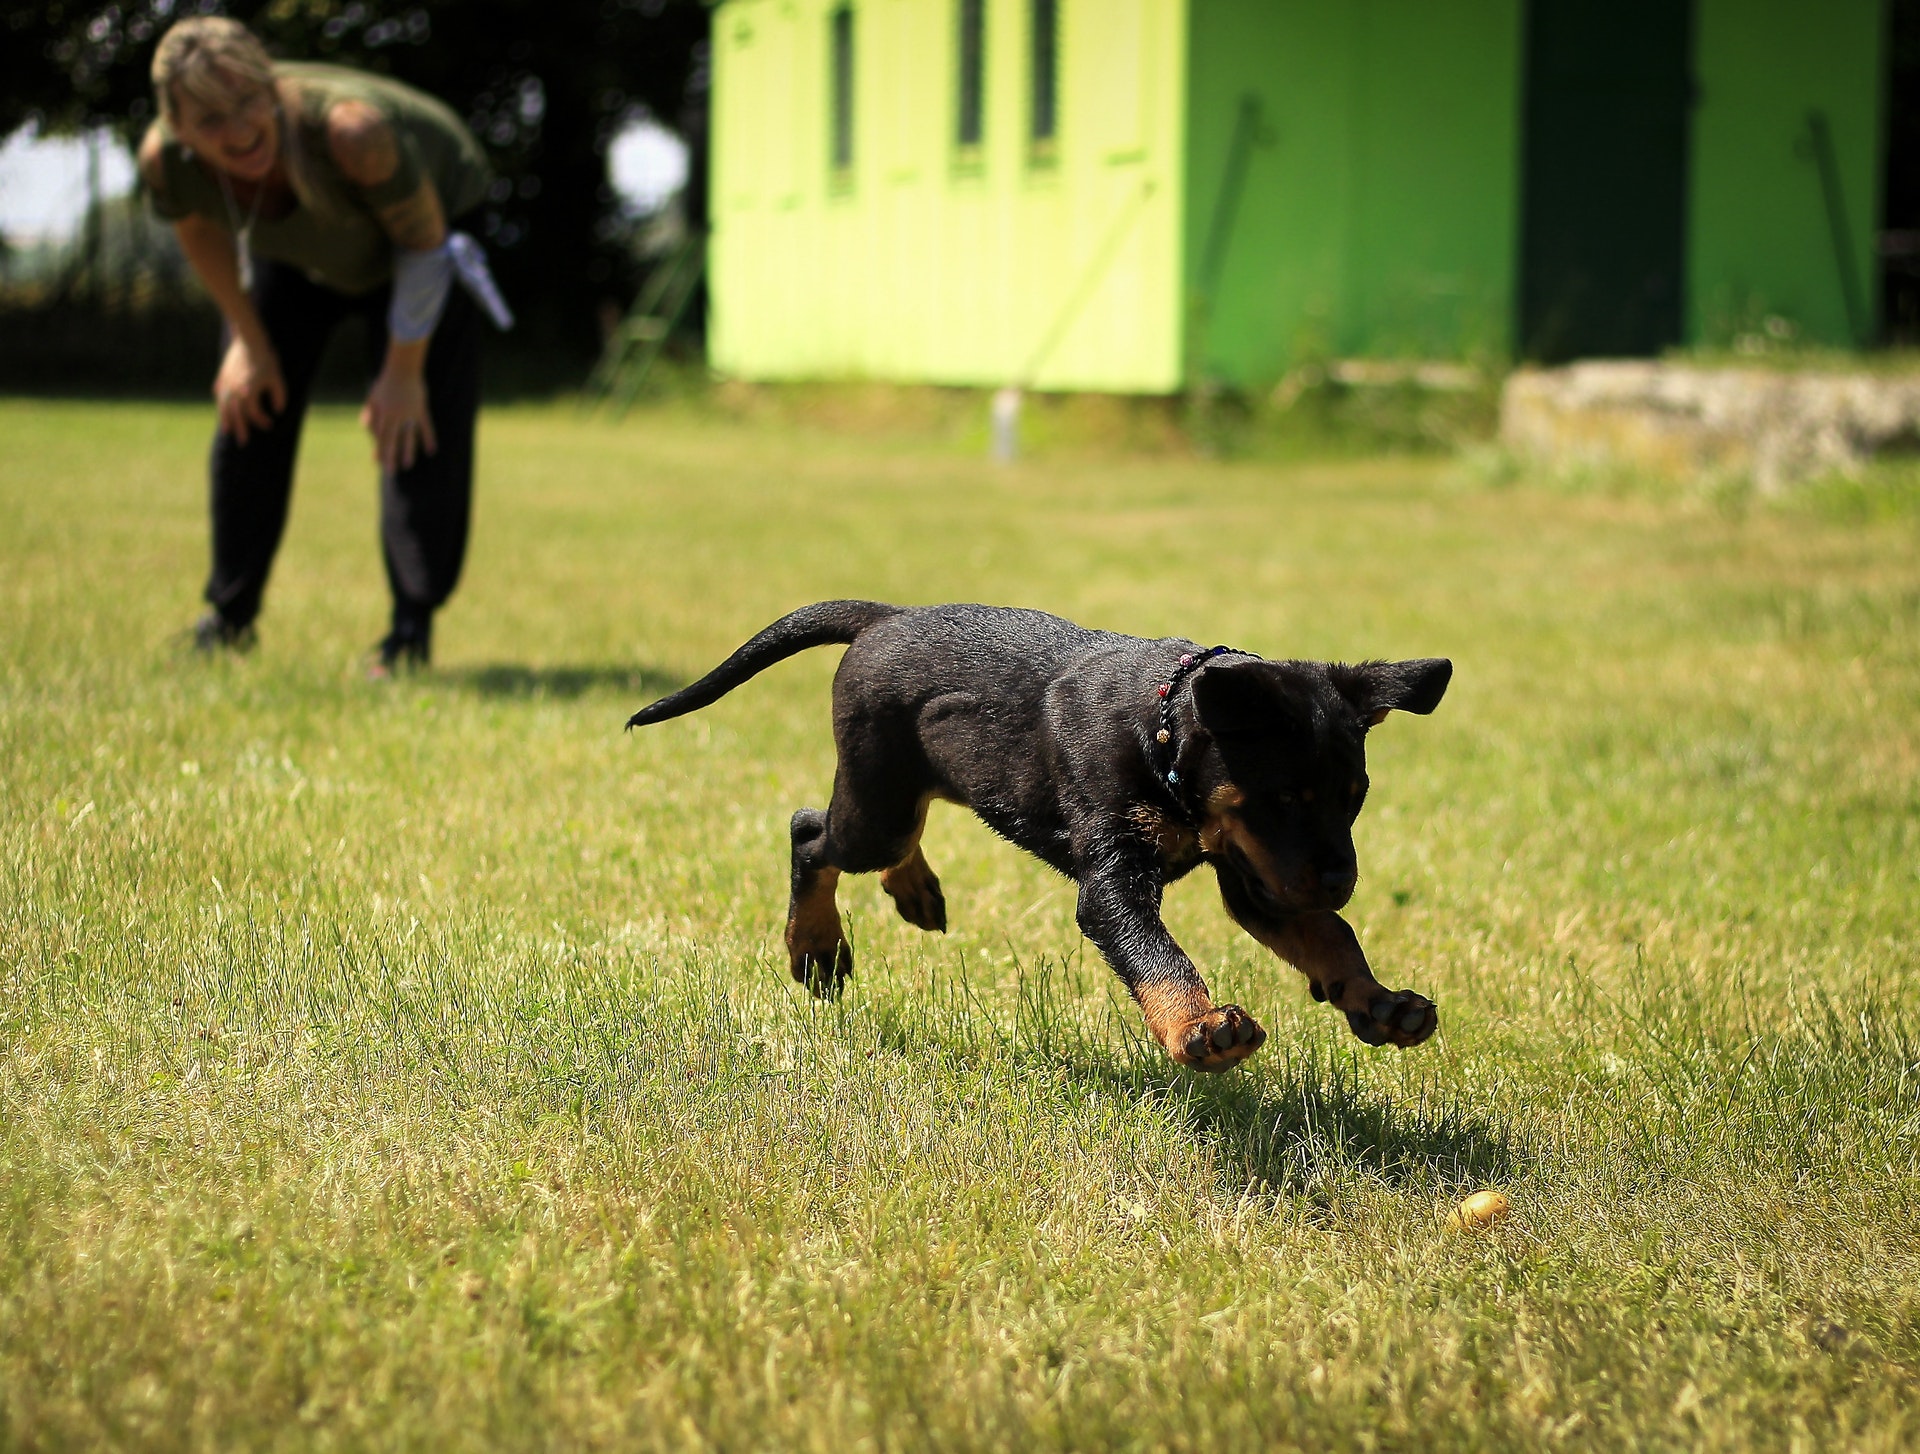 7 Common Dog Training Mistakes and How to Avoid Them